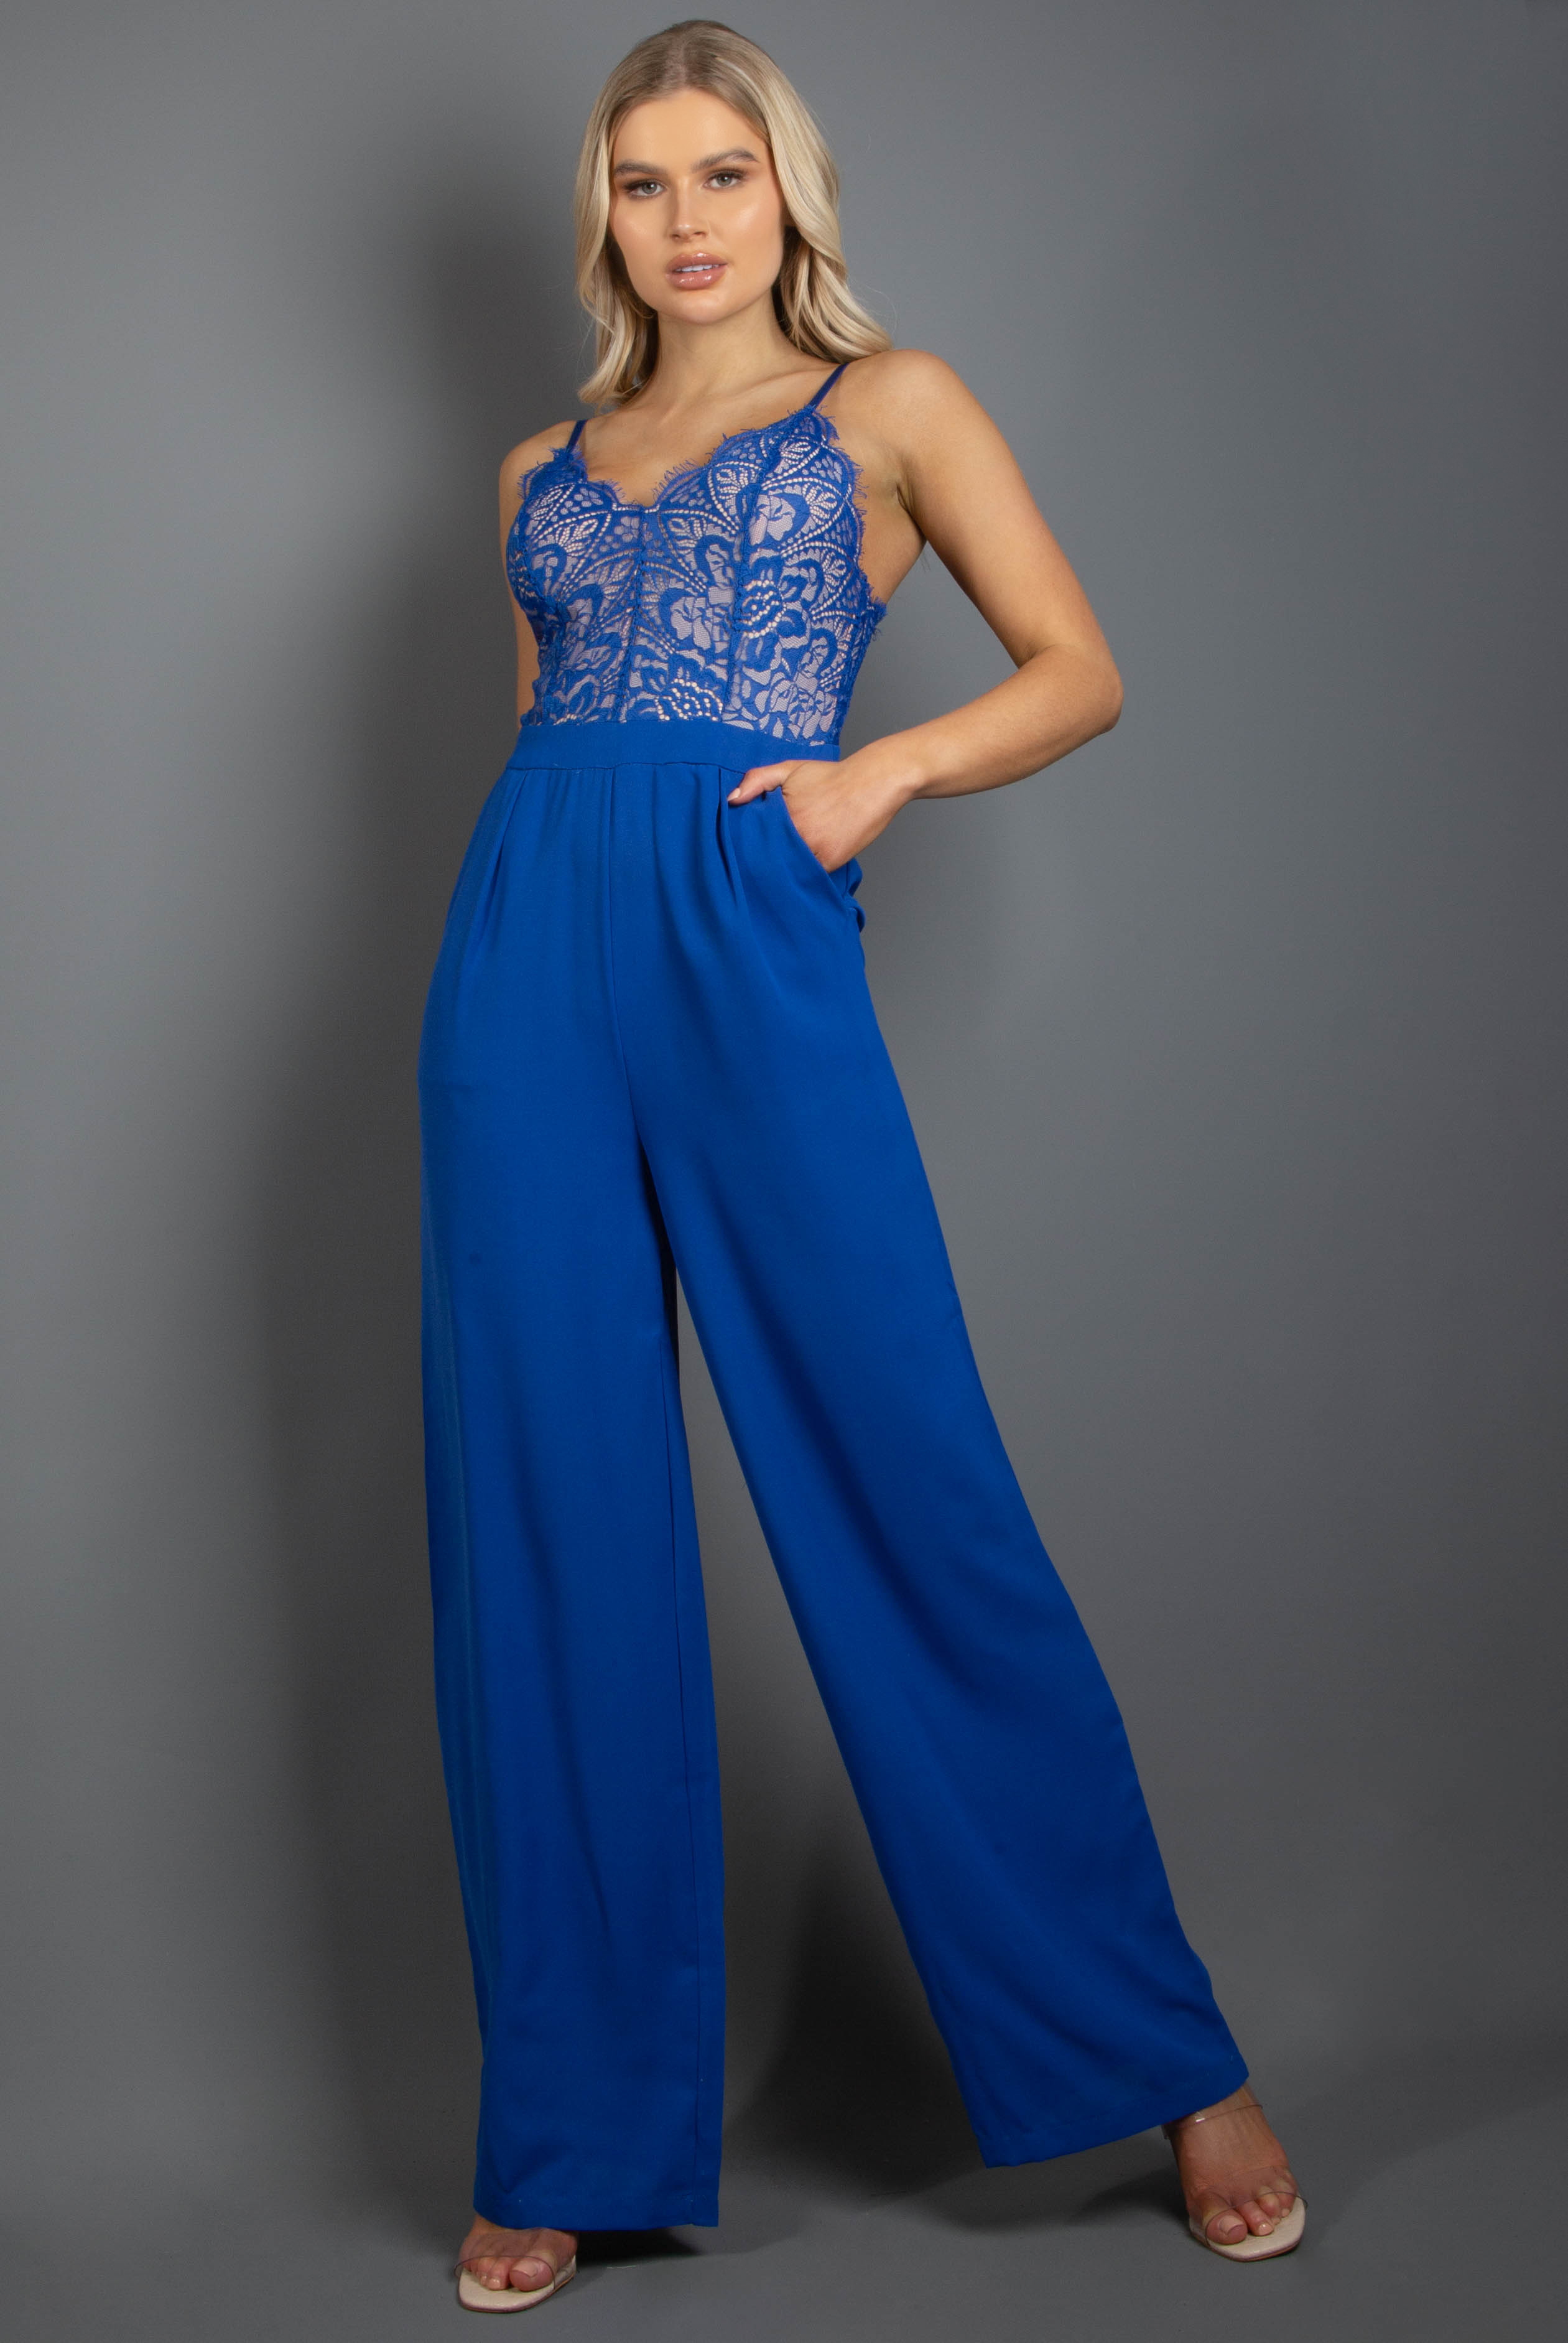 Lace Bodice Cami Jumpsuit - Buy Fashion Wholesale in The UK